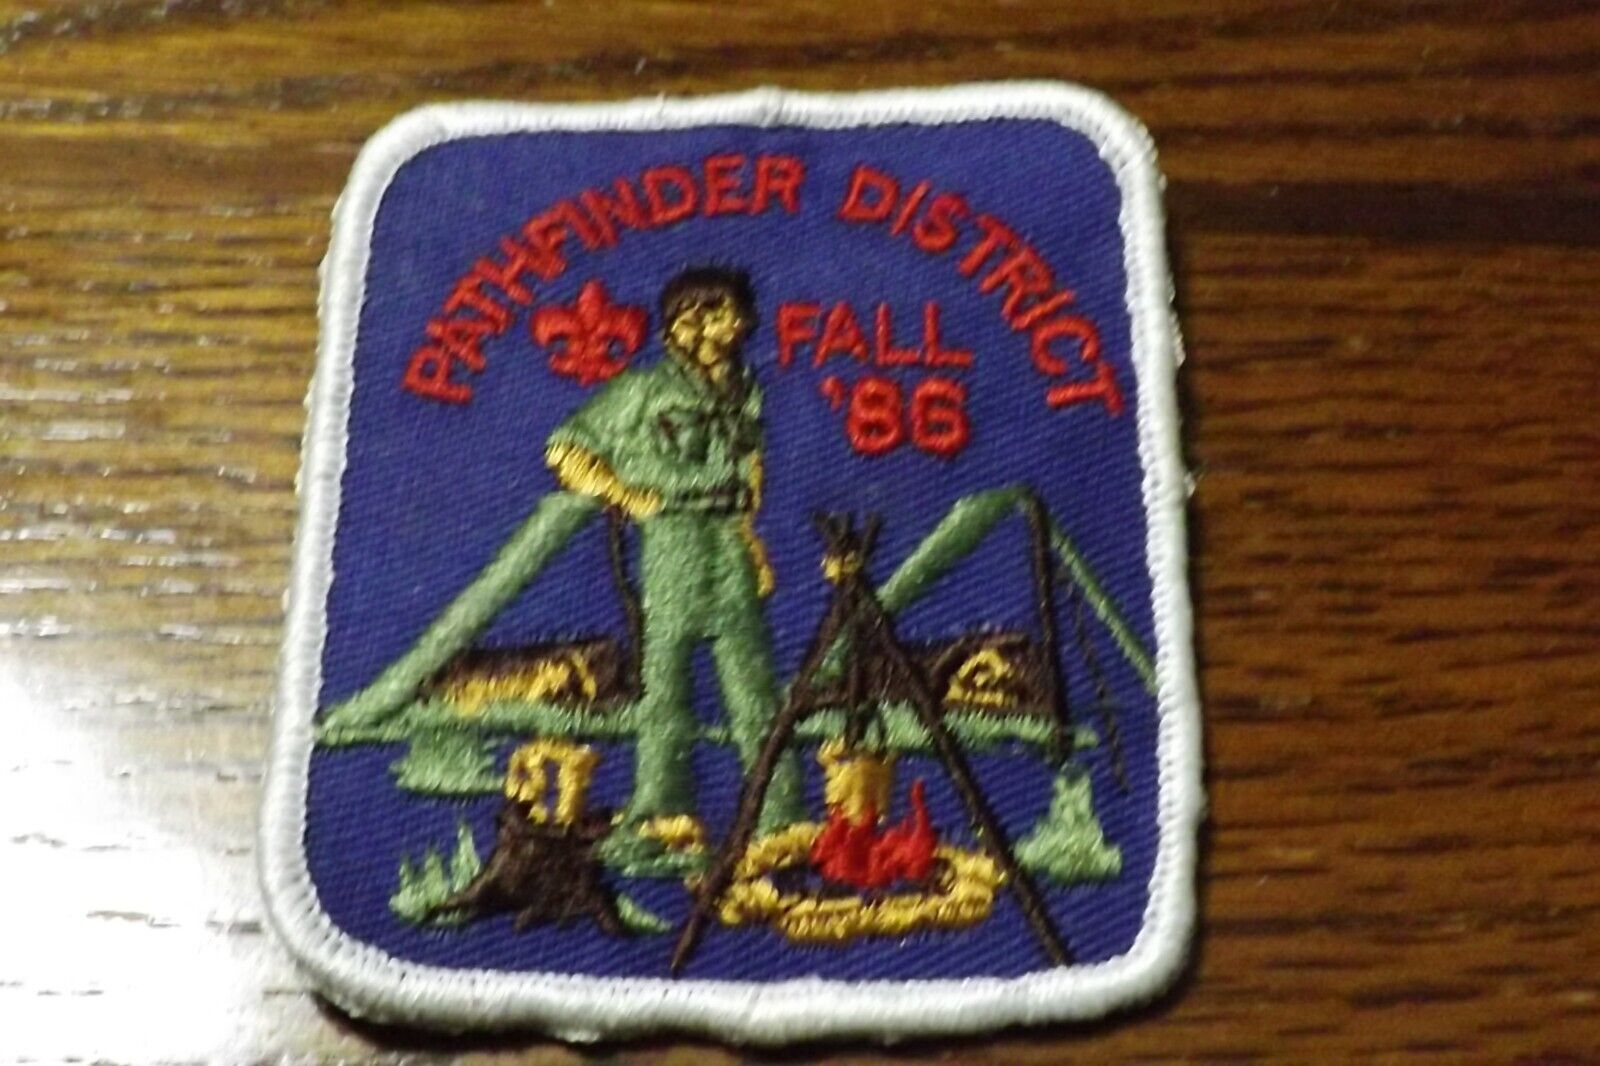 BOY SCOUT PATCH 1986 PATHFINDER DIST. FALL NORMAN ROCKWELL STANDING SCOUTMASTER